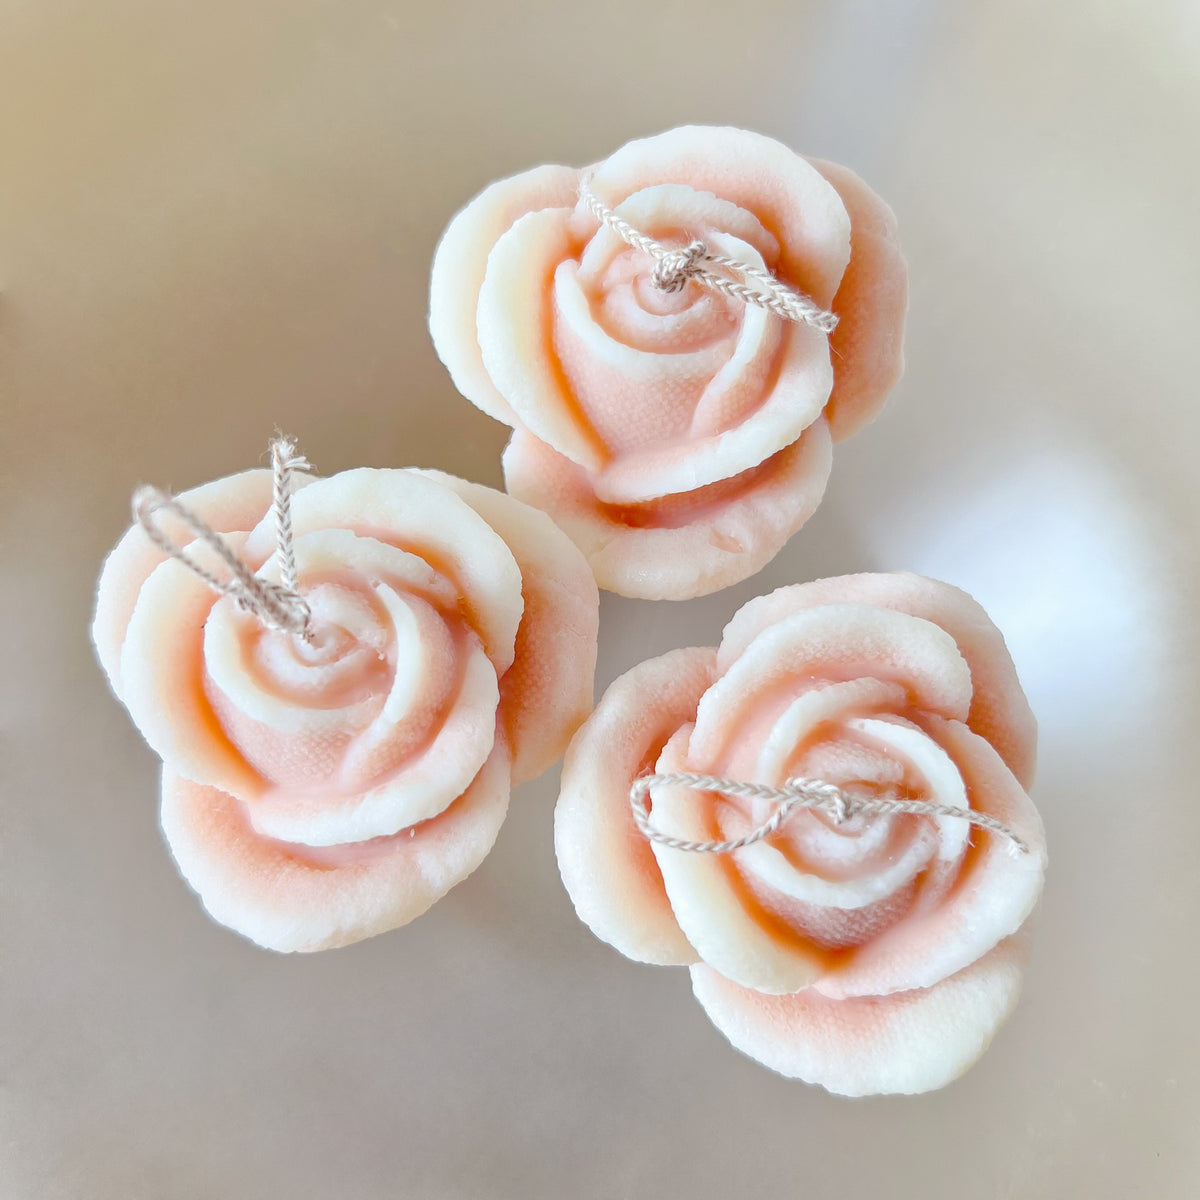 Rose Flower Candle, Decorative Candle, Handmade Scented Soy Wax Candle Australia | LMJ Candles